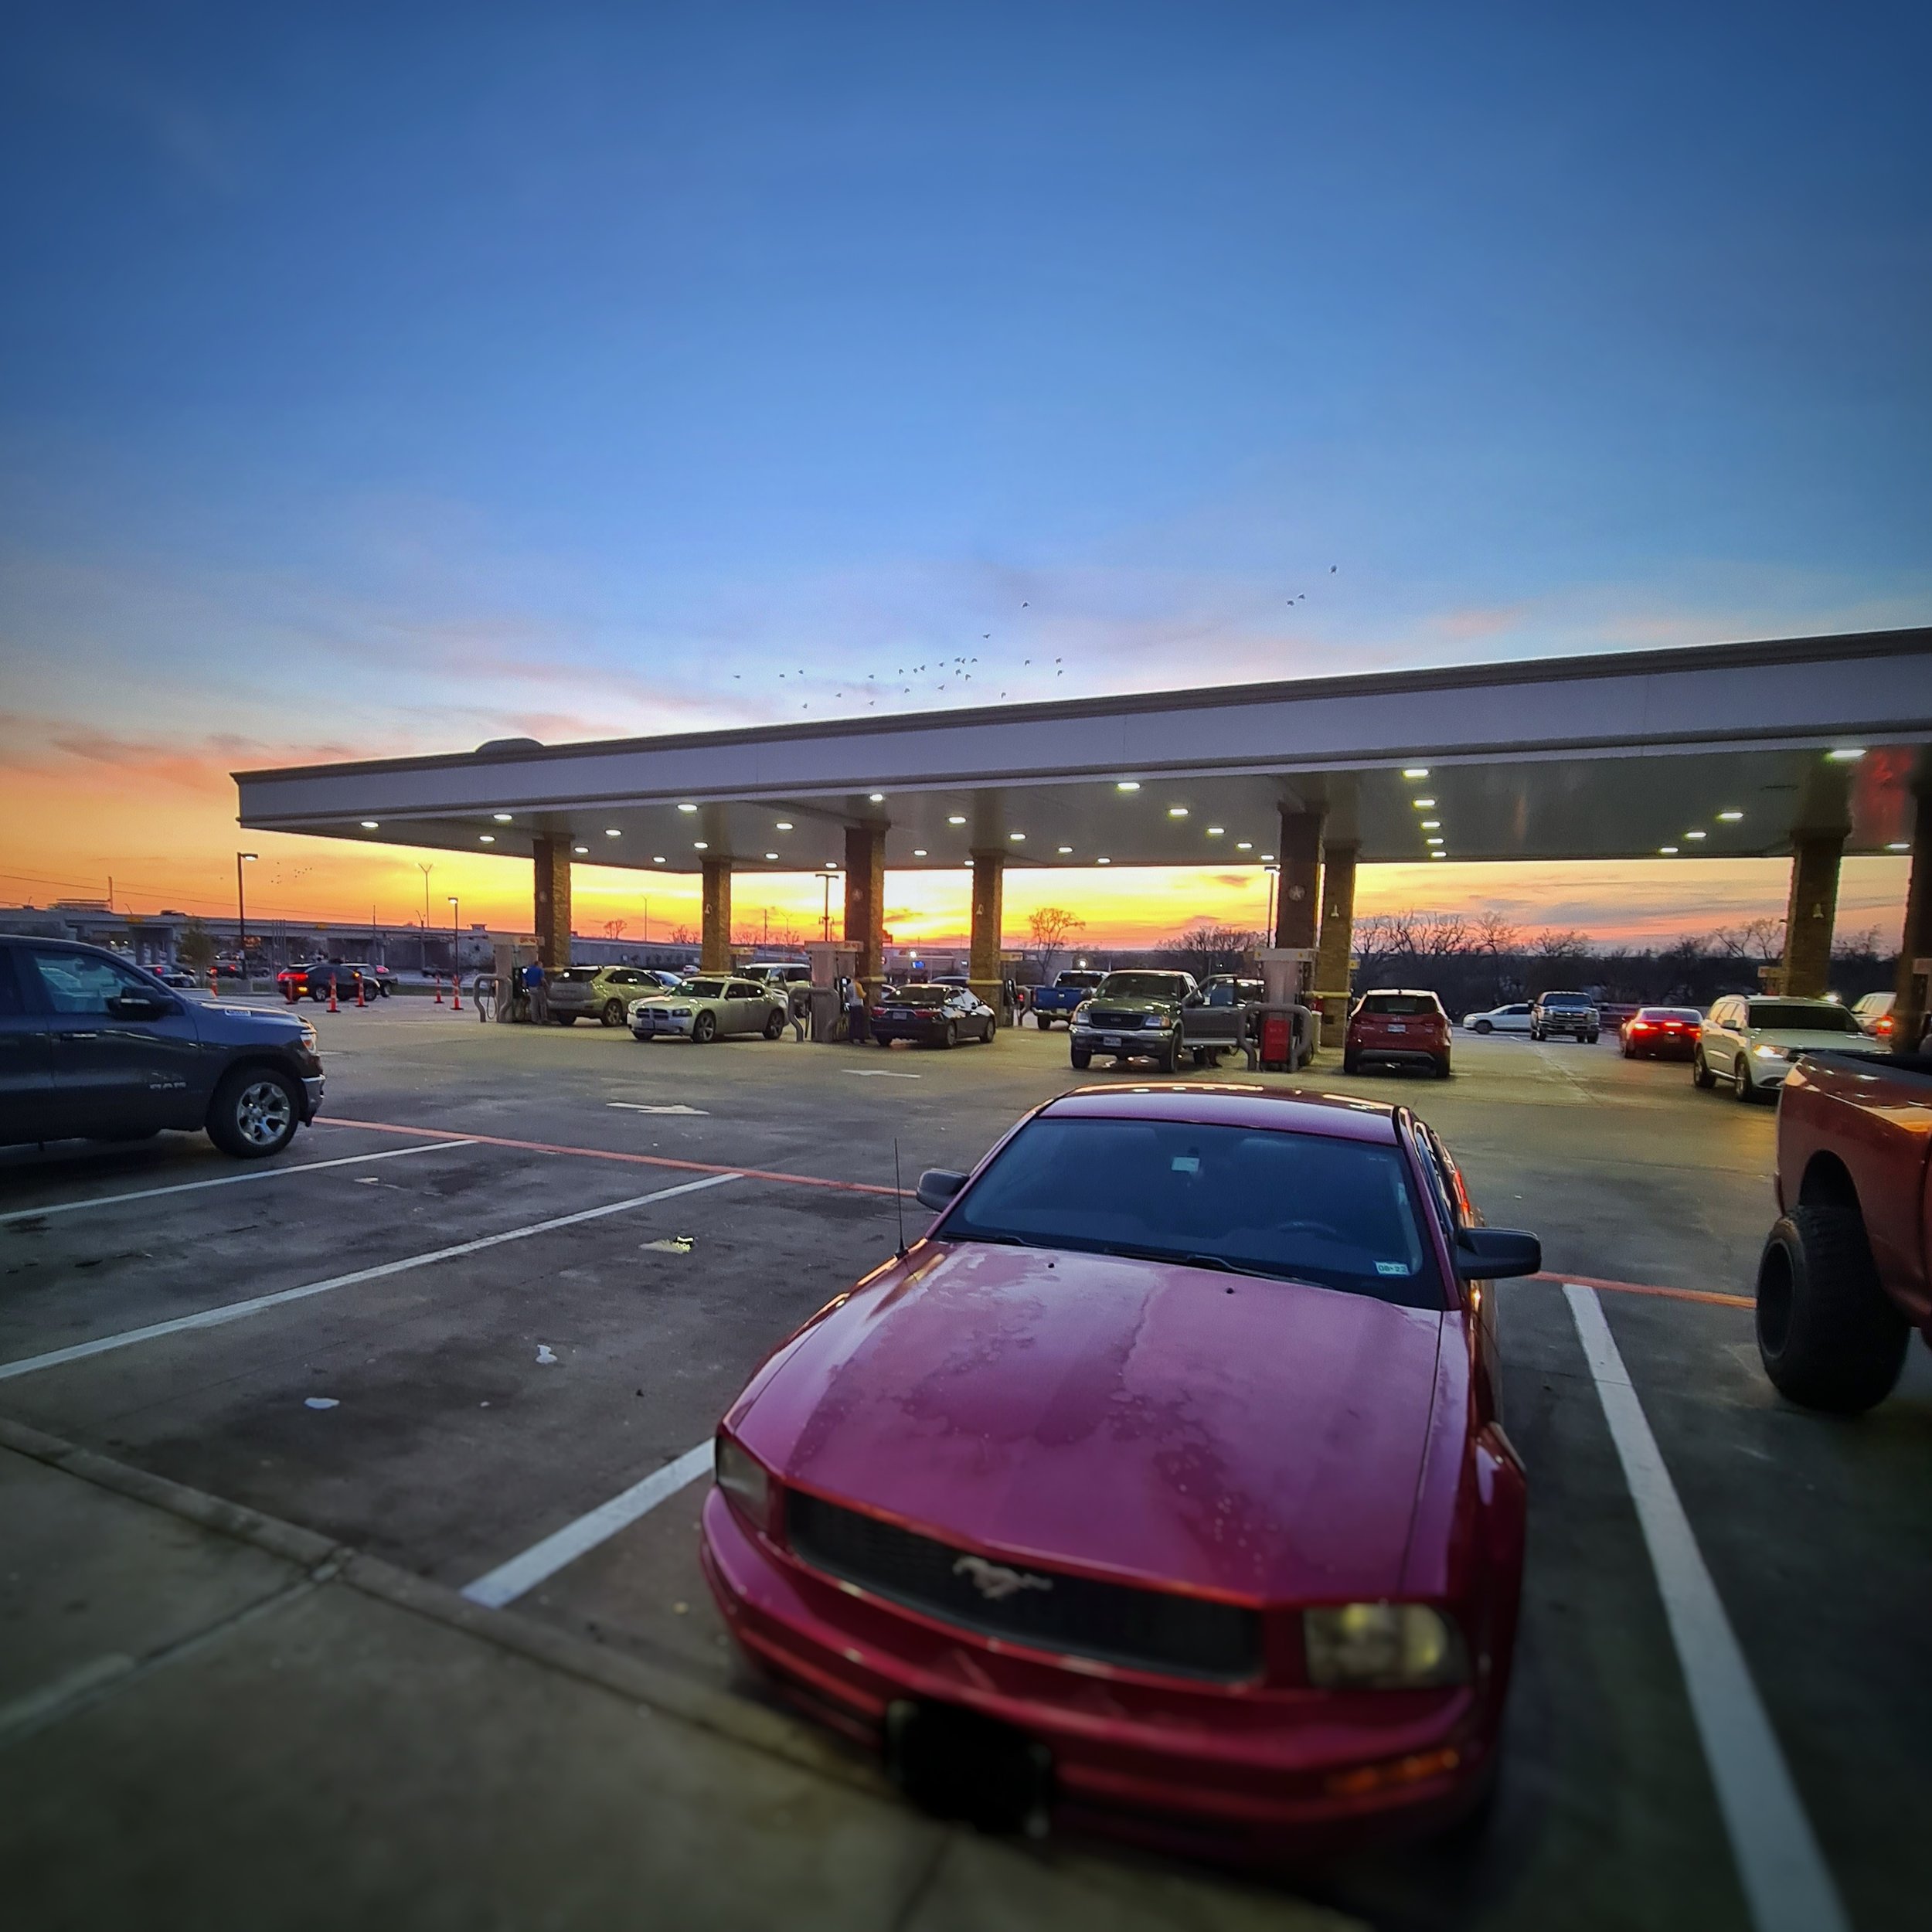 Day 357 - December 22: Sunset at Buc-ee's